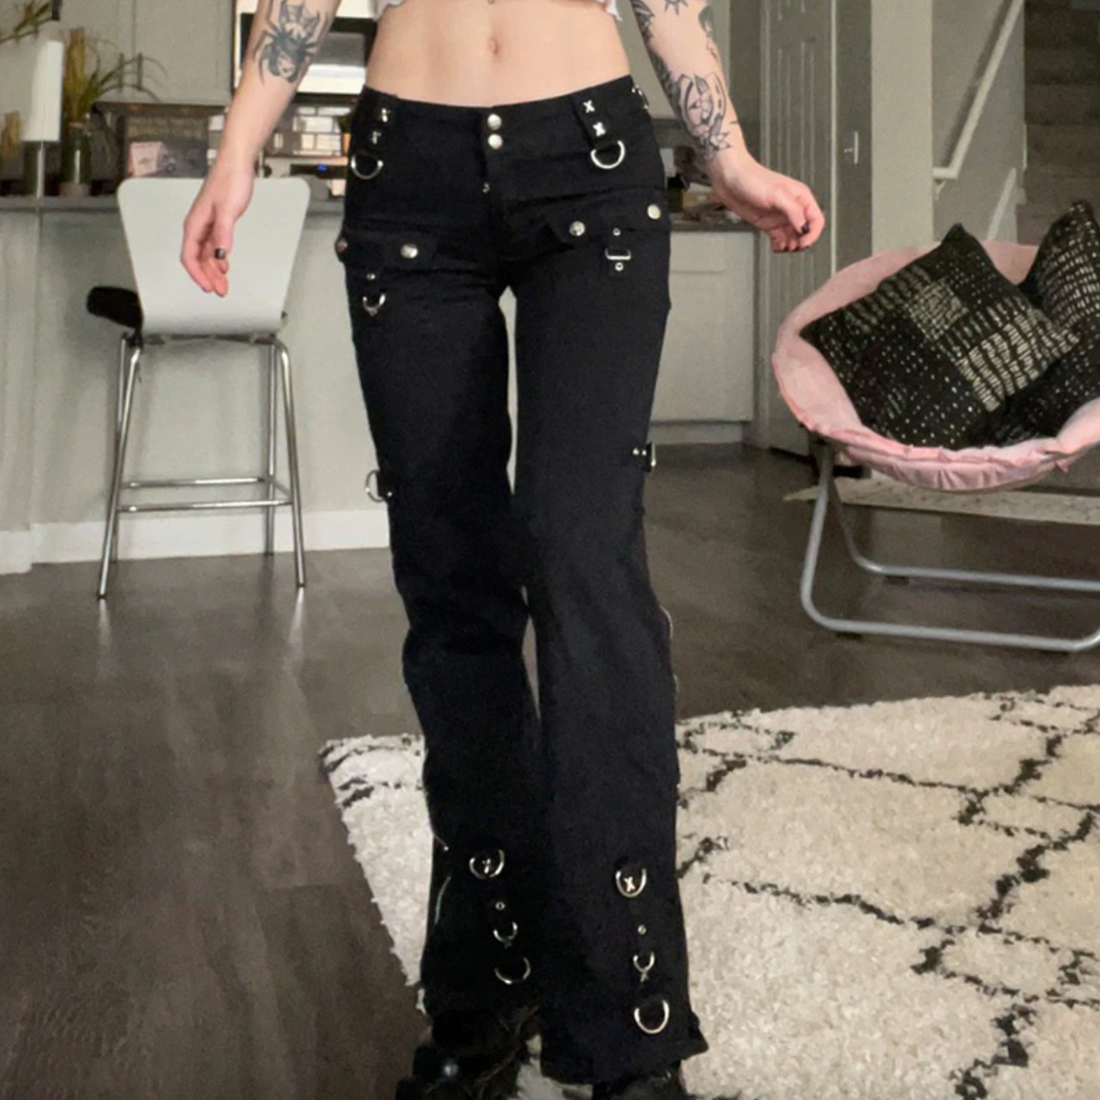 Women's Spring/Autumn Punk Gothic Low Waist Pants with Rivets